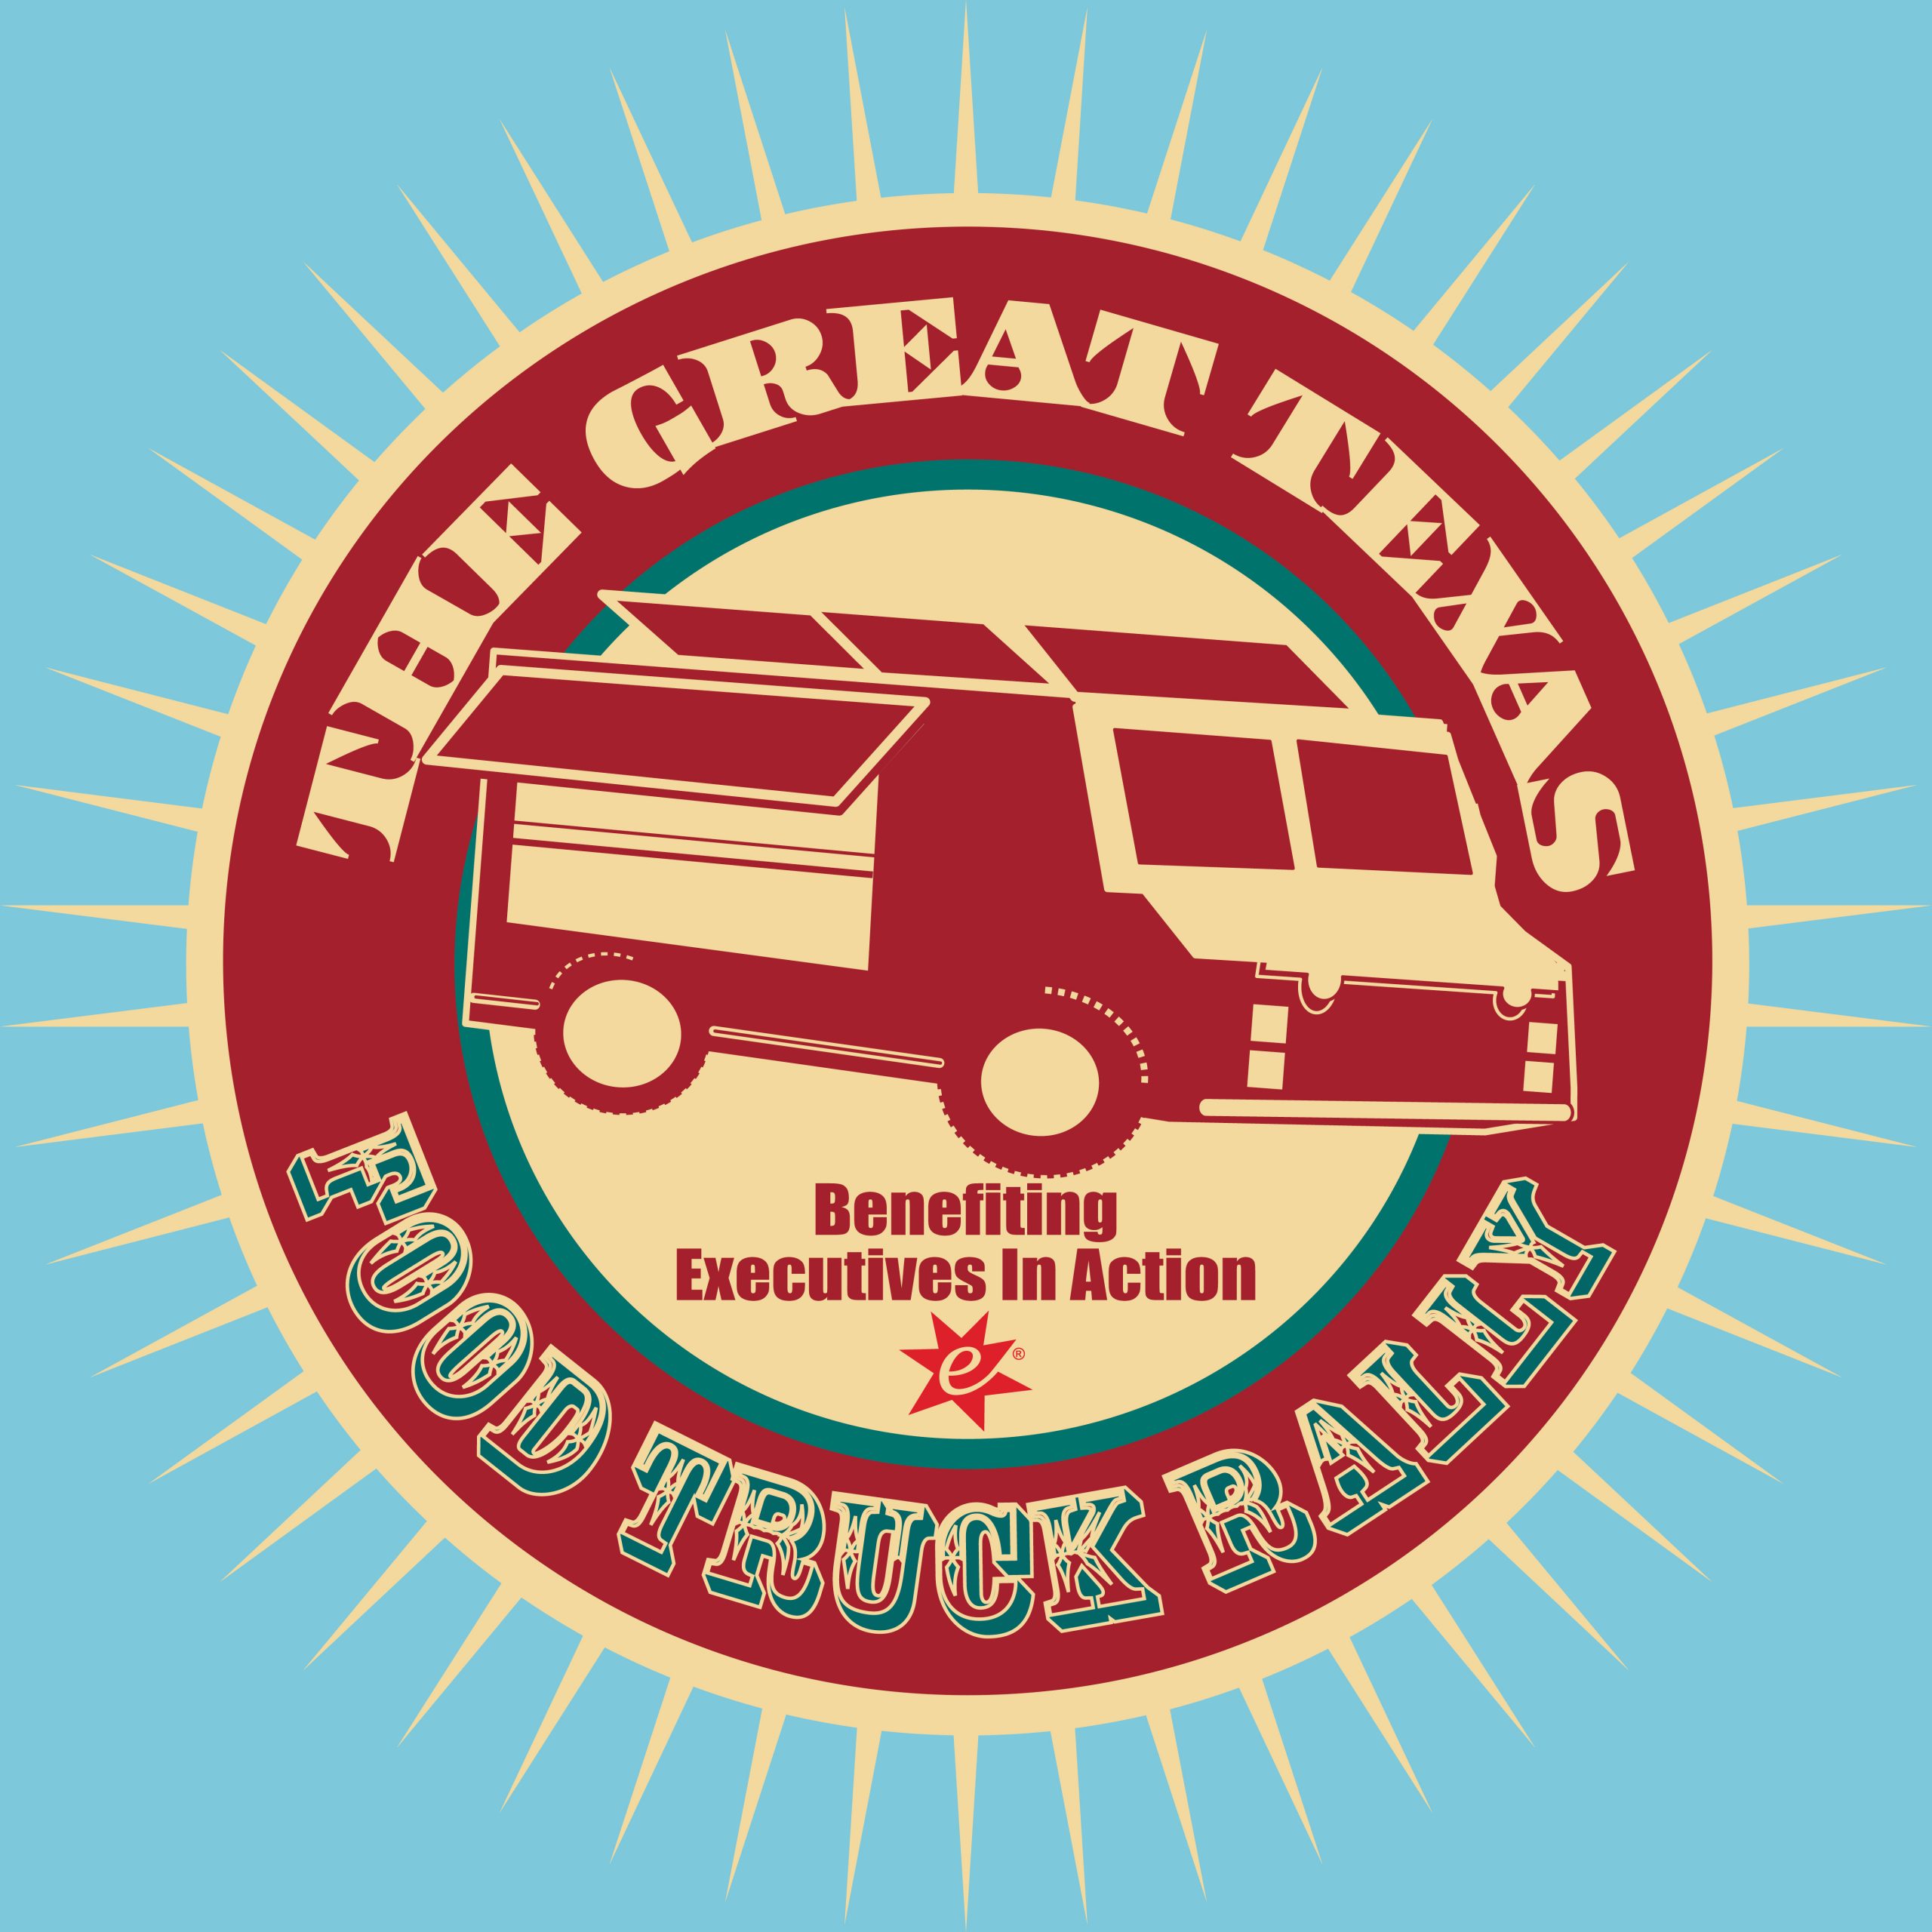 The Great Texas Food Truck Rally logo in Dallas